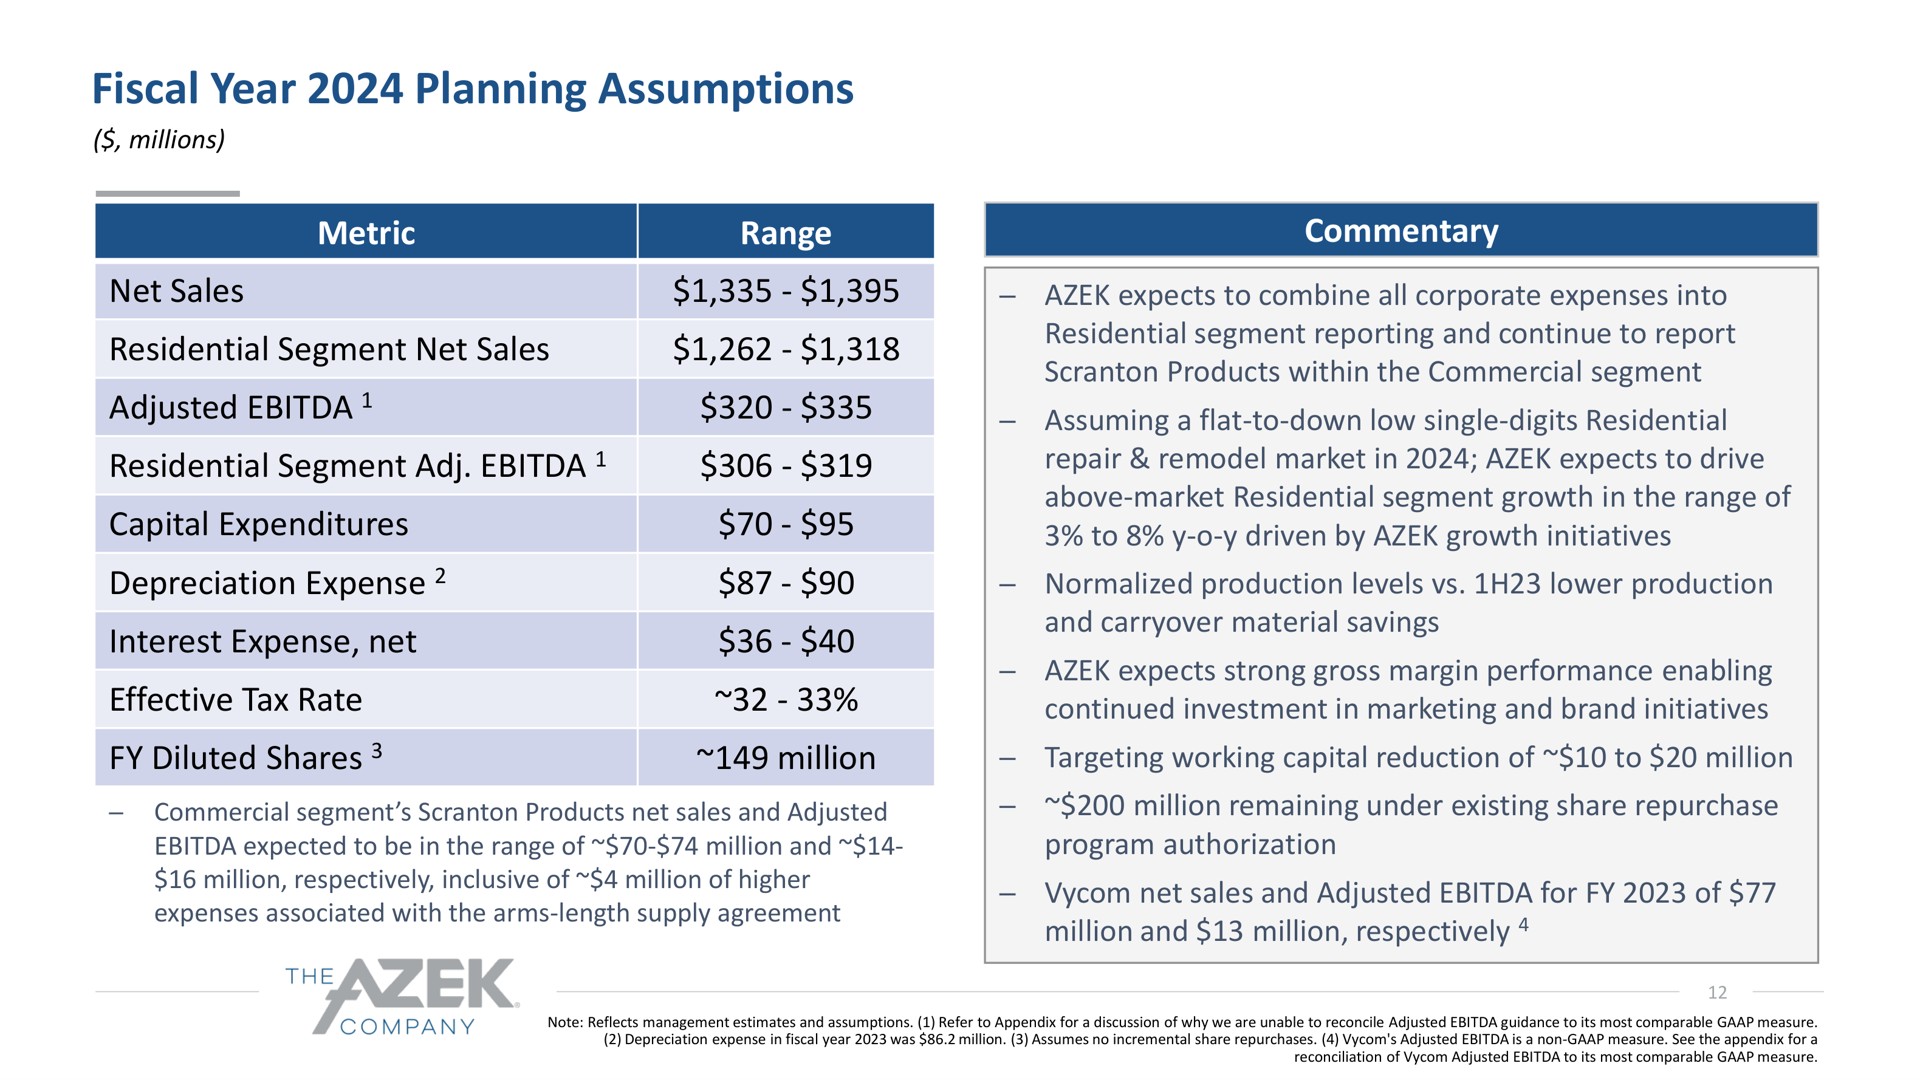 fiscal year planning assumptions depreciation expense normalized production levels lower production | Azek